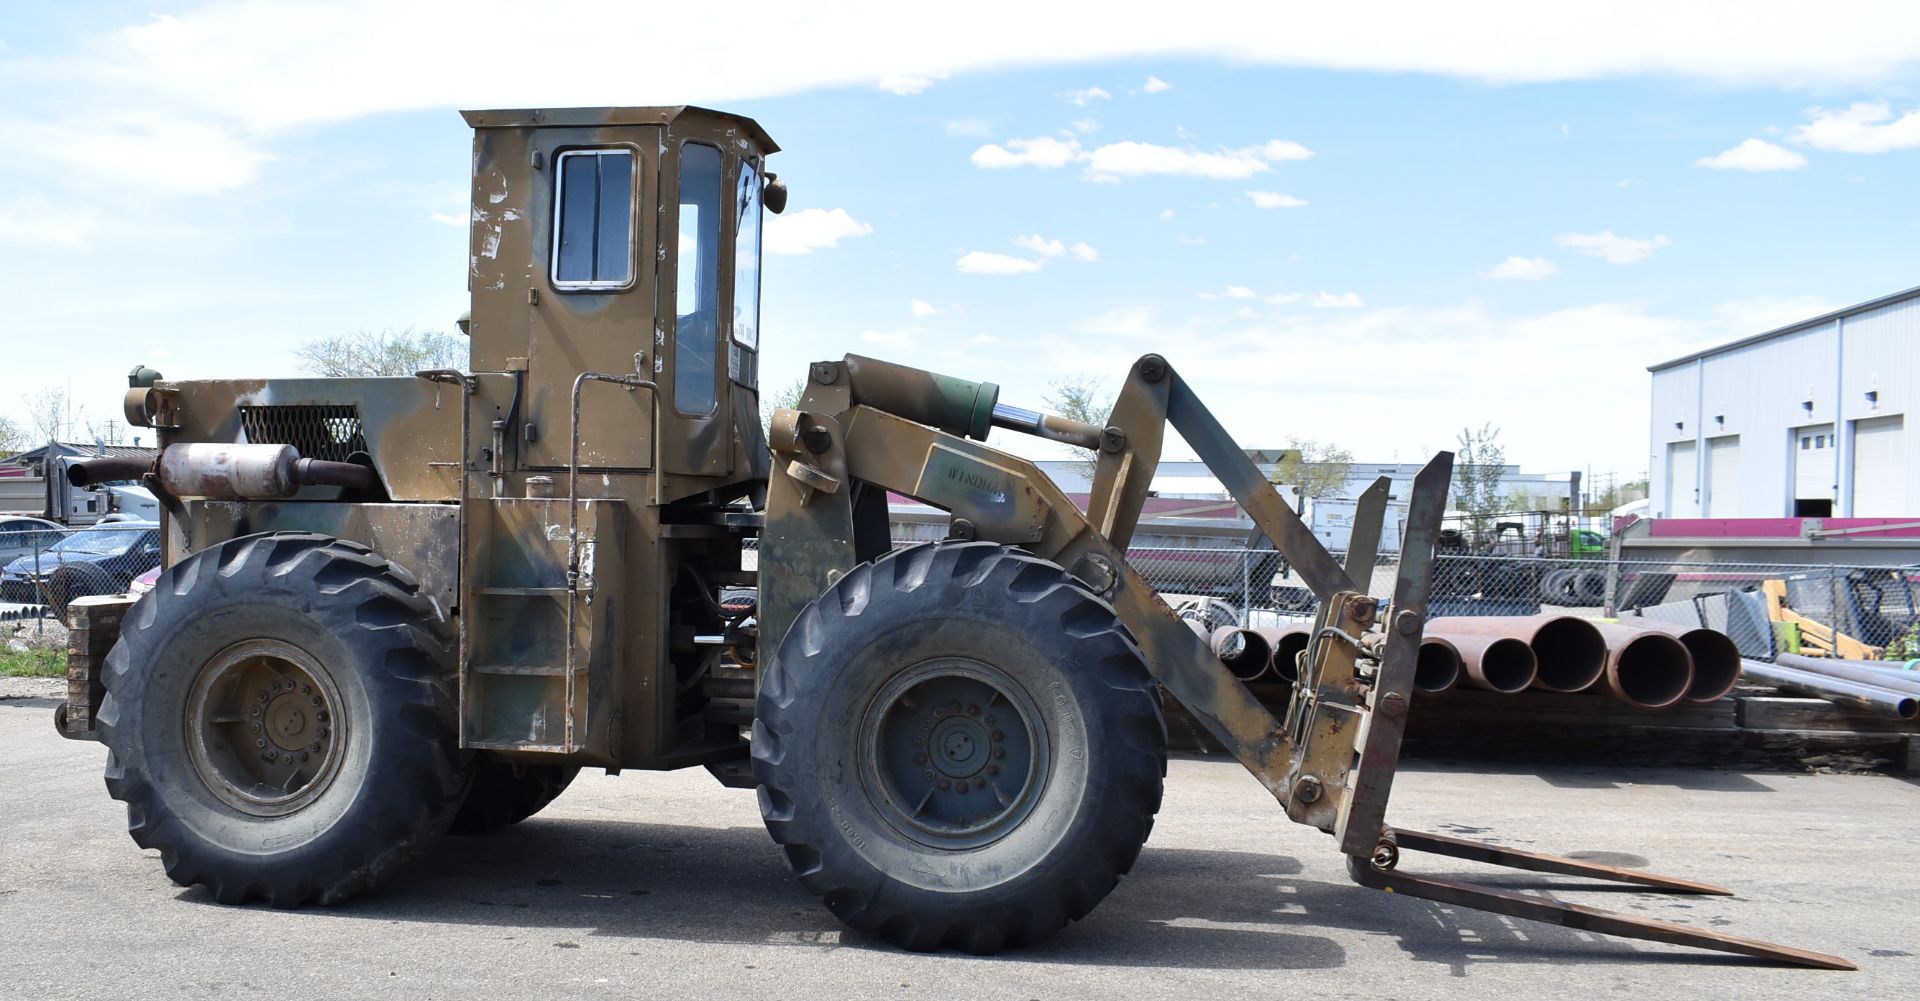 WINNDOM 201-1283 12,000LBS. CAPACITY ARTICULATING FRONT END LOADER WITH DETROIT DIESEL ENGINE, - Image 4 of 19